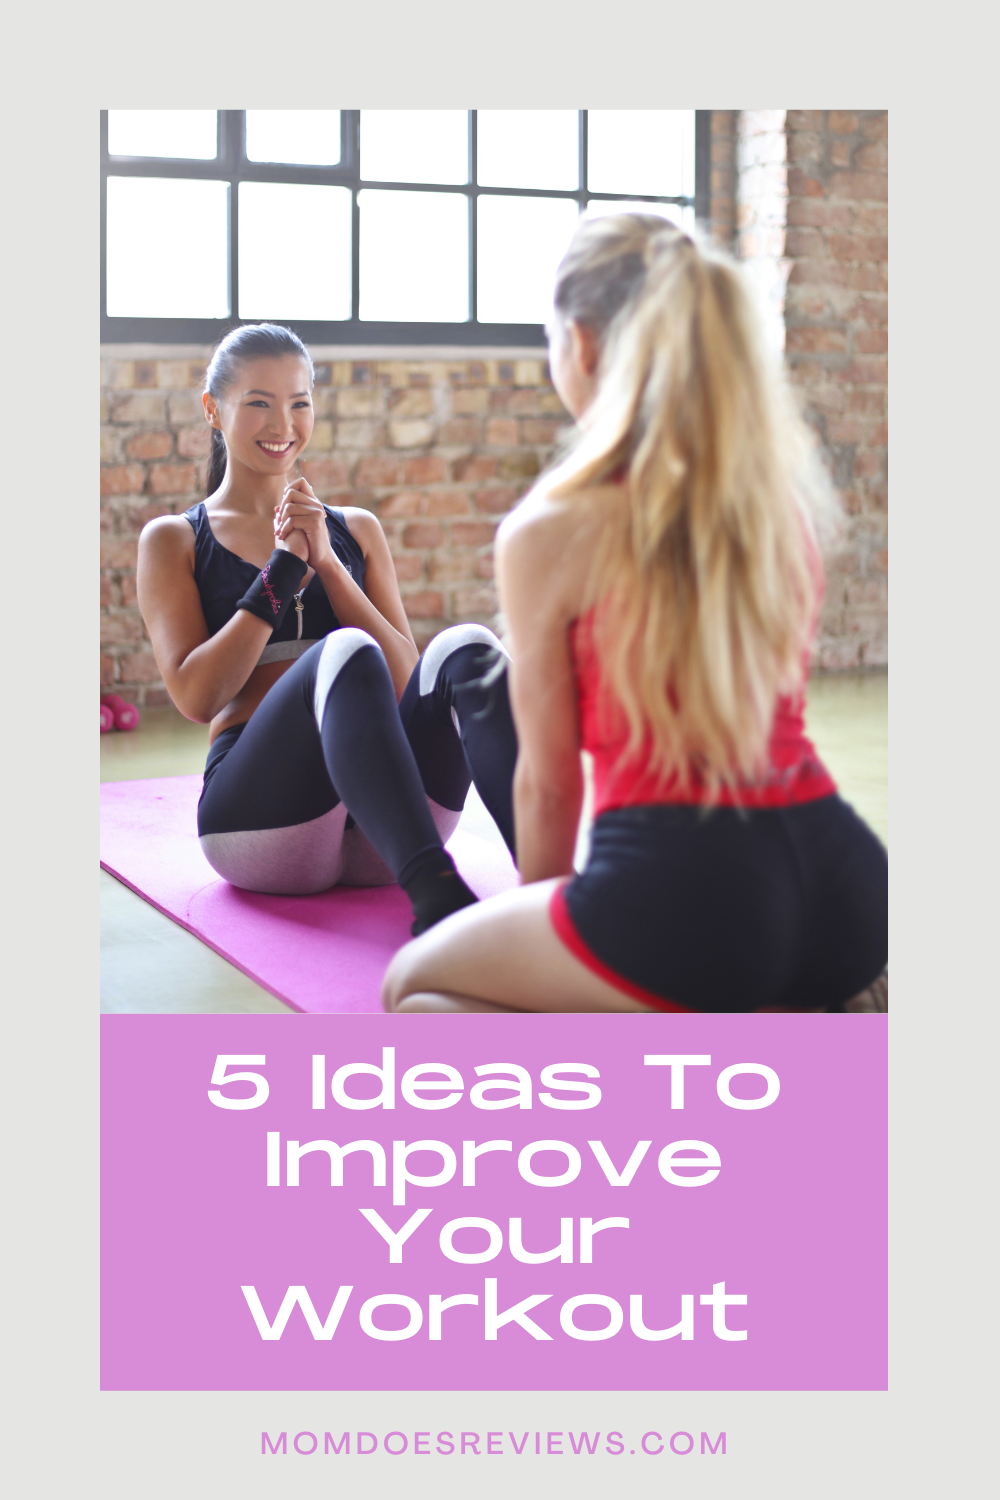 5 Ideas To Improve Your Workout